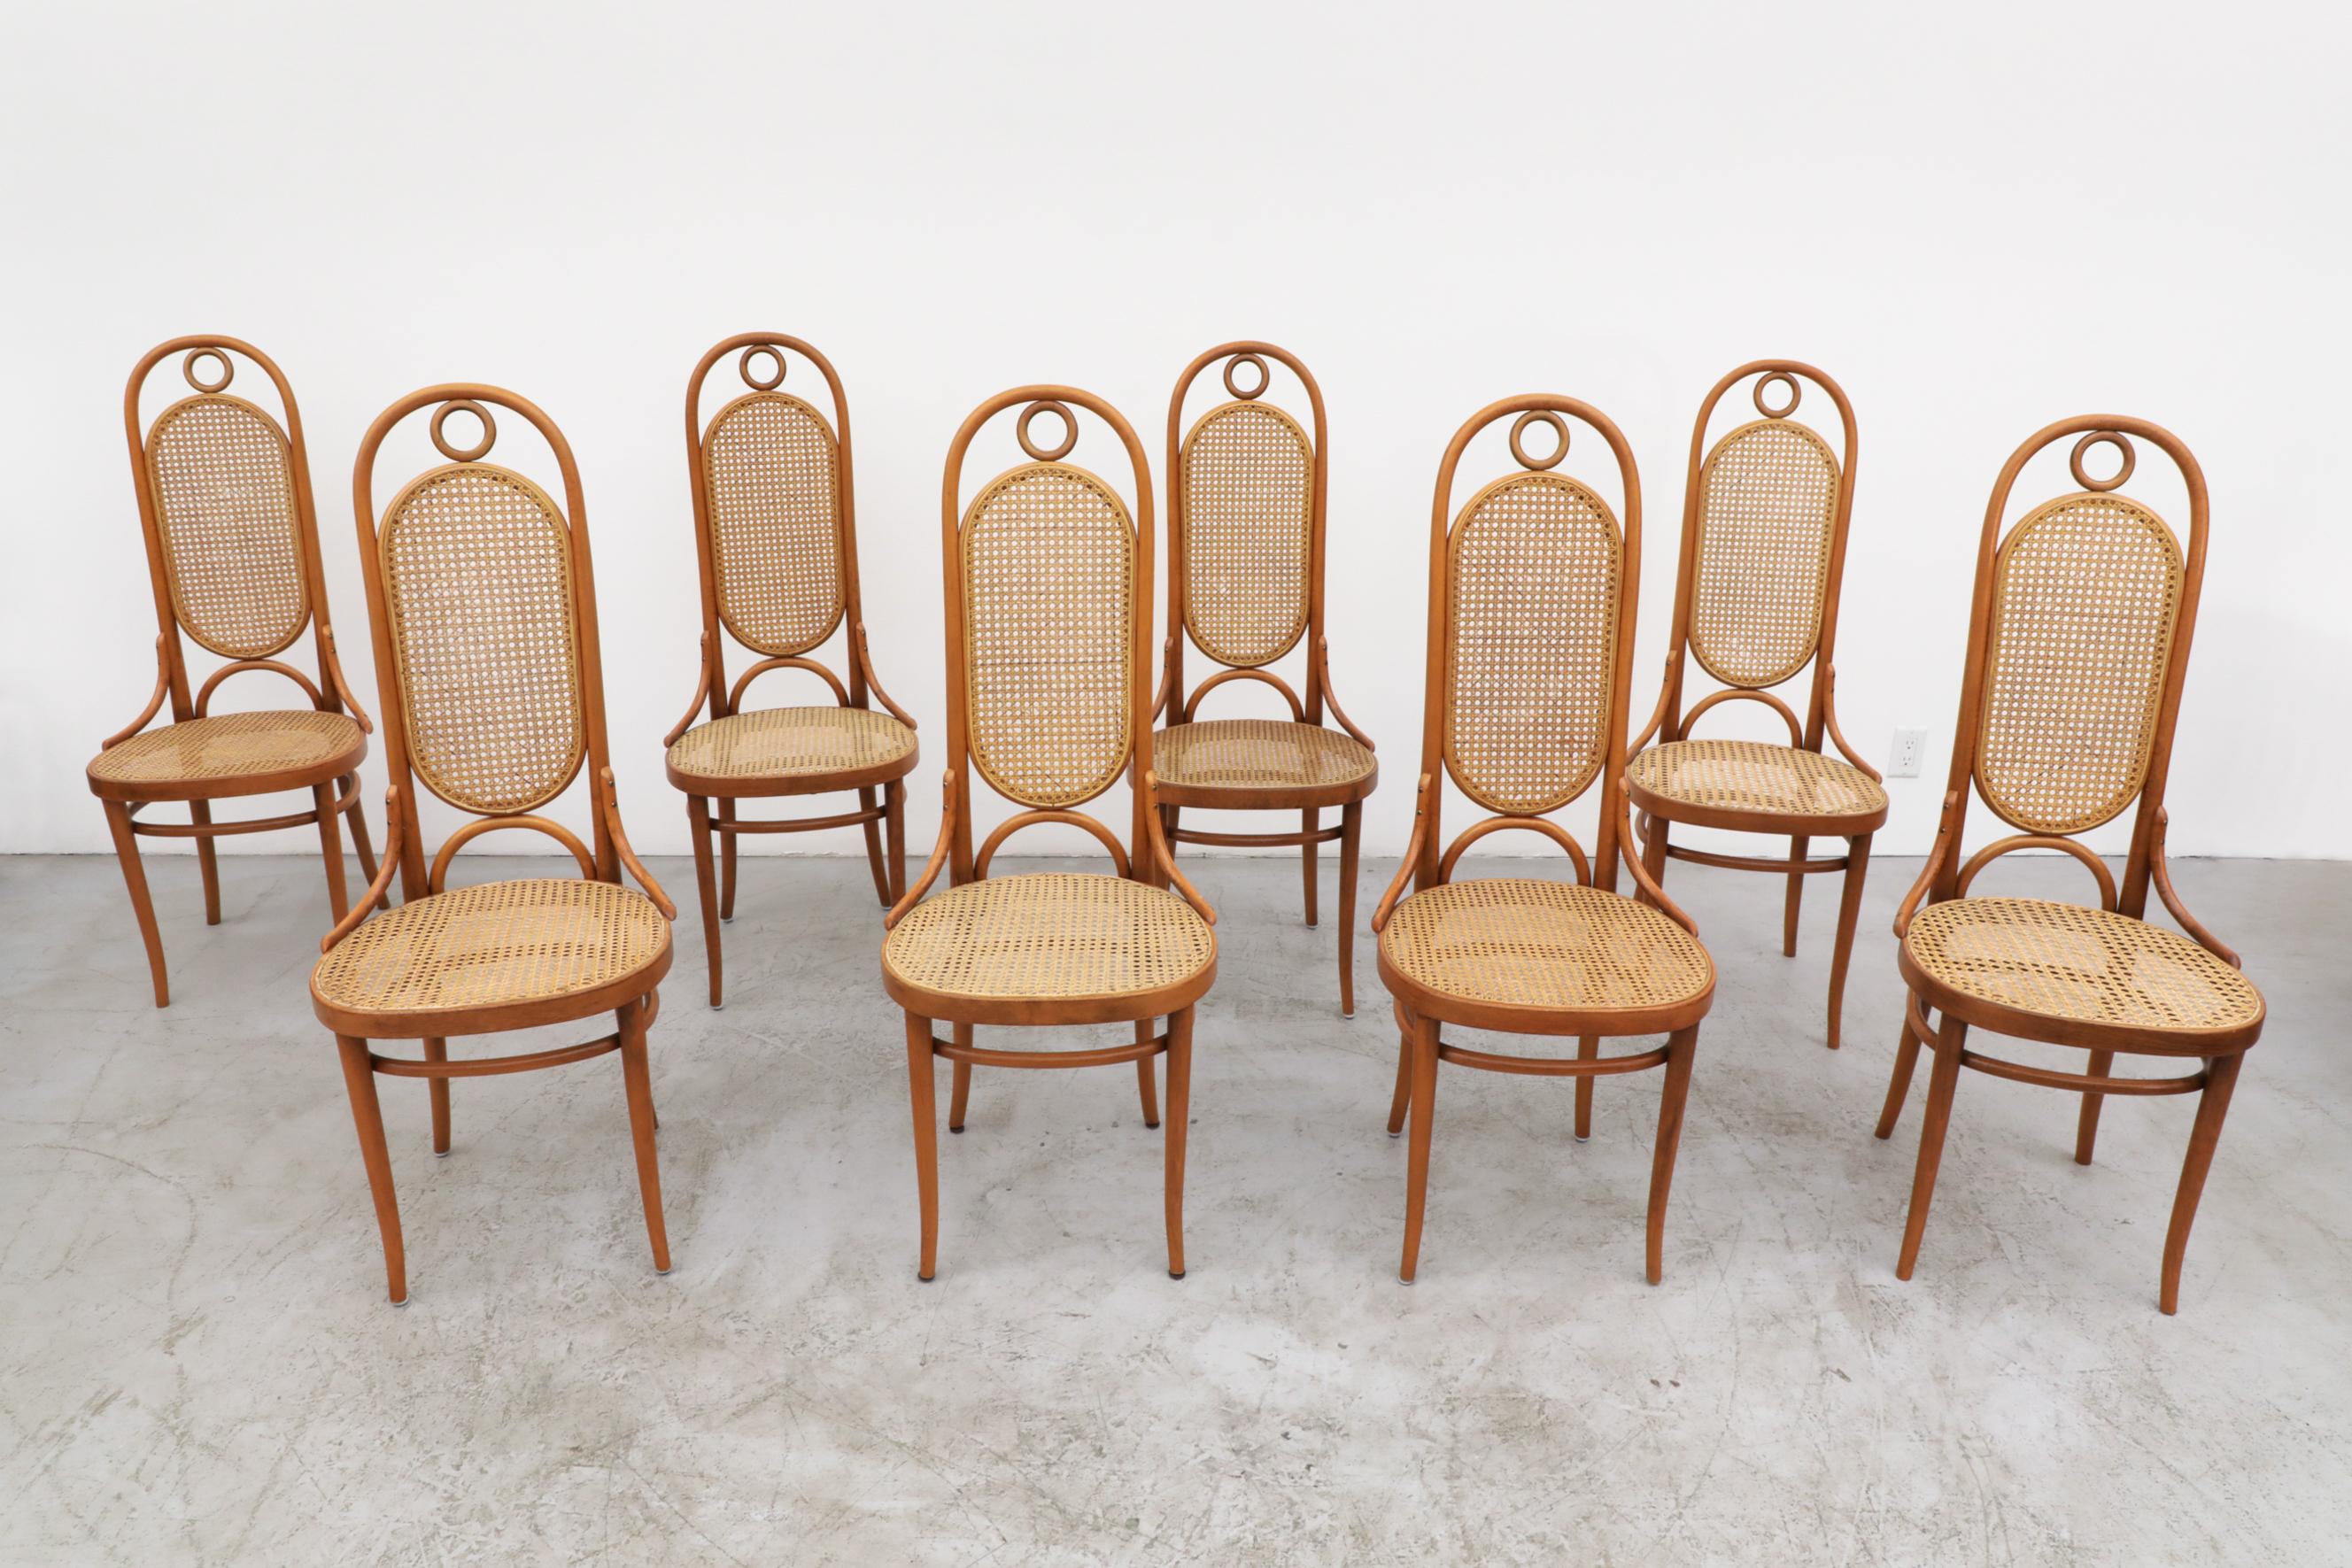 Cane Set of 8 Thonet N.17 High Back Bentwood Chairs